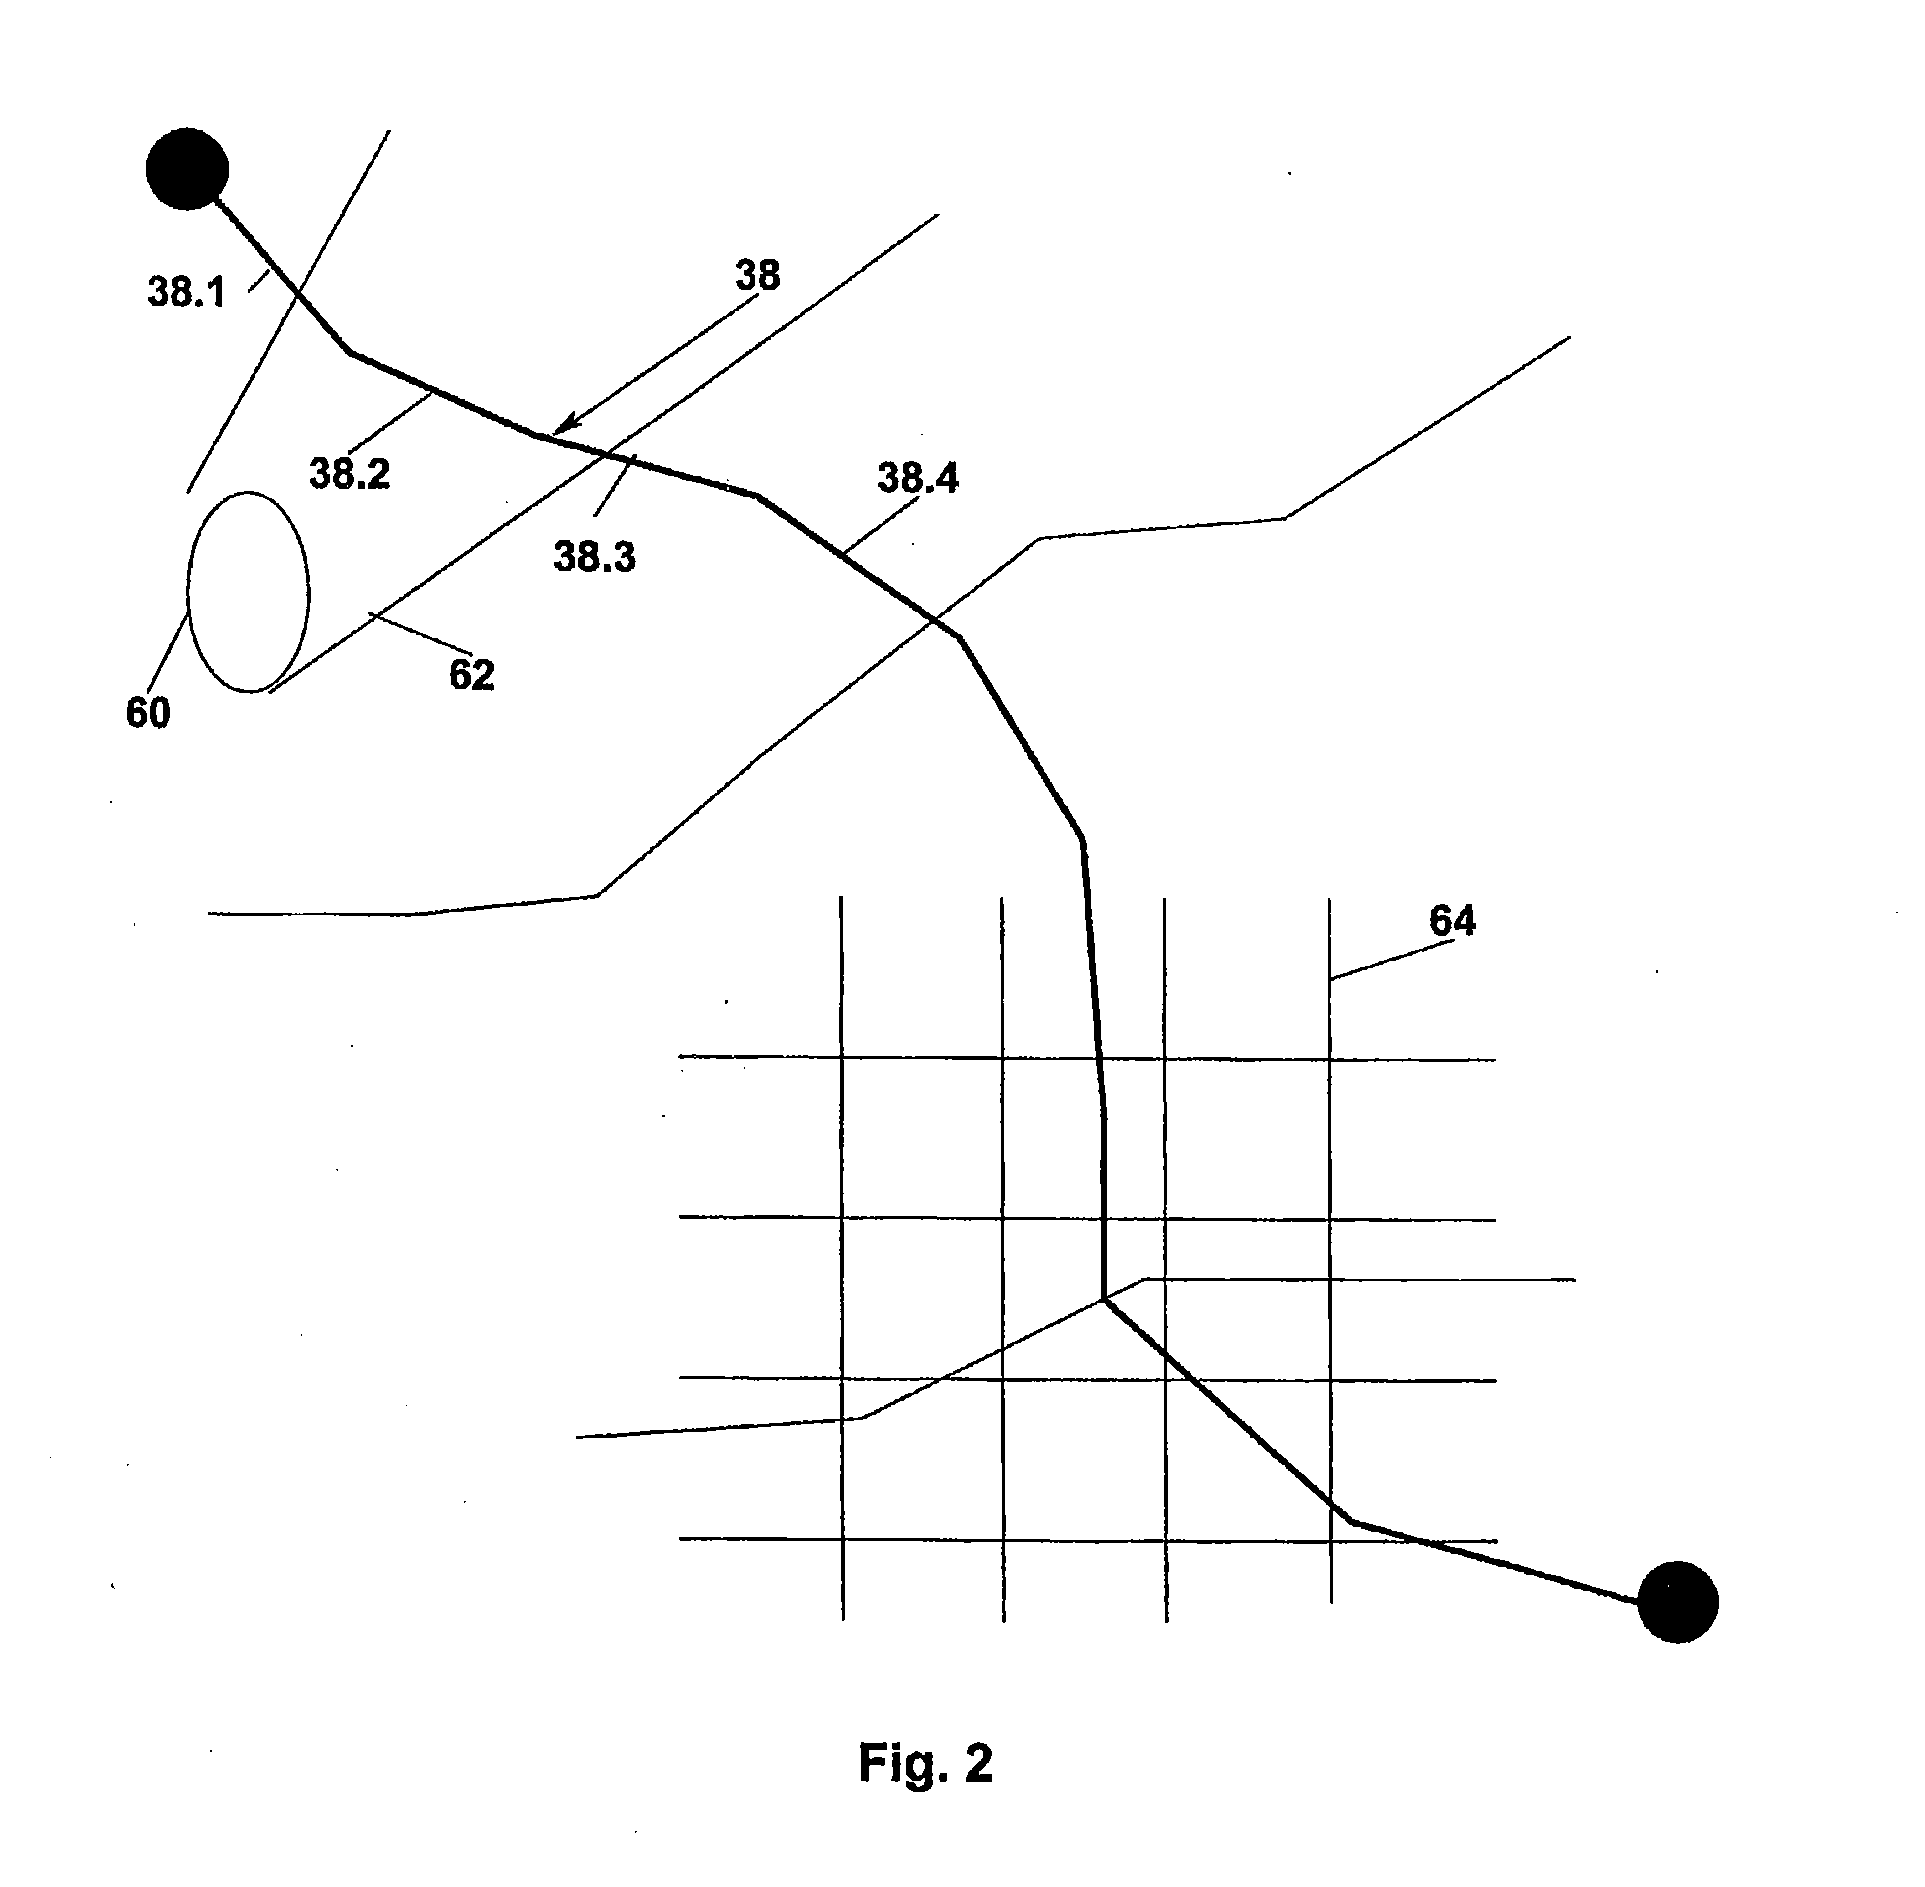 System and Method for Weather Mapping to Road Segments